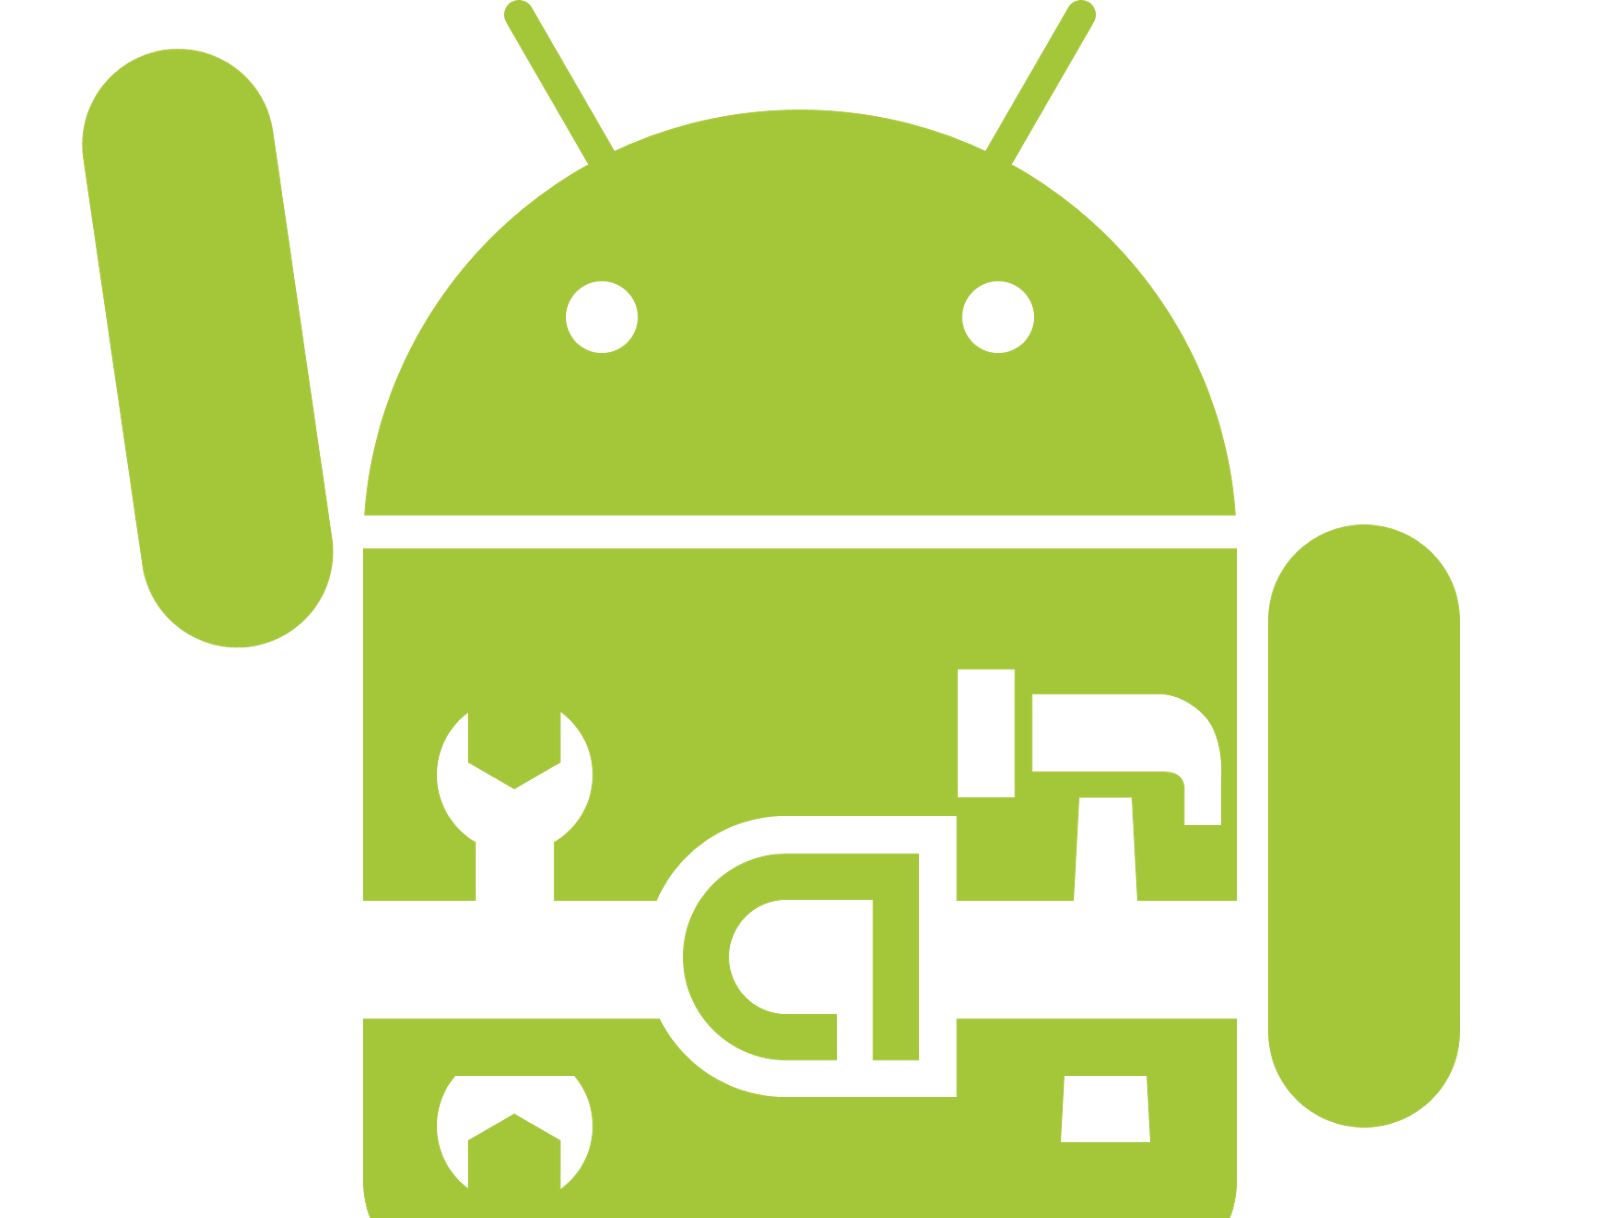 What is ADB in Android